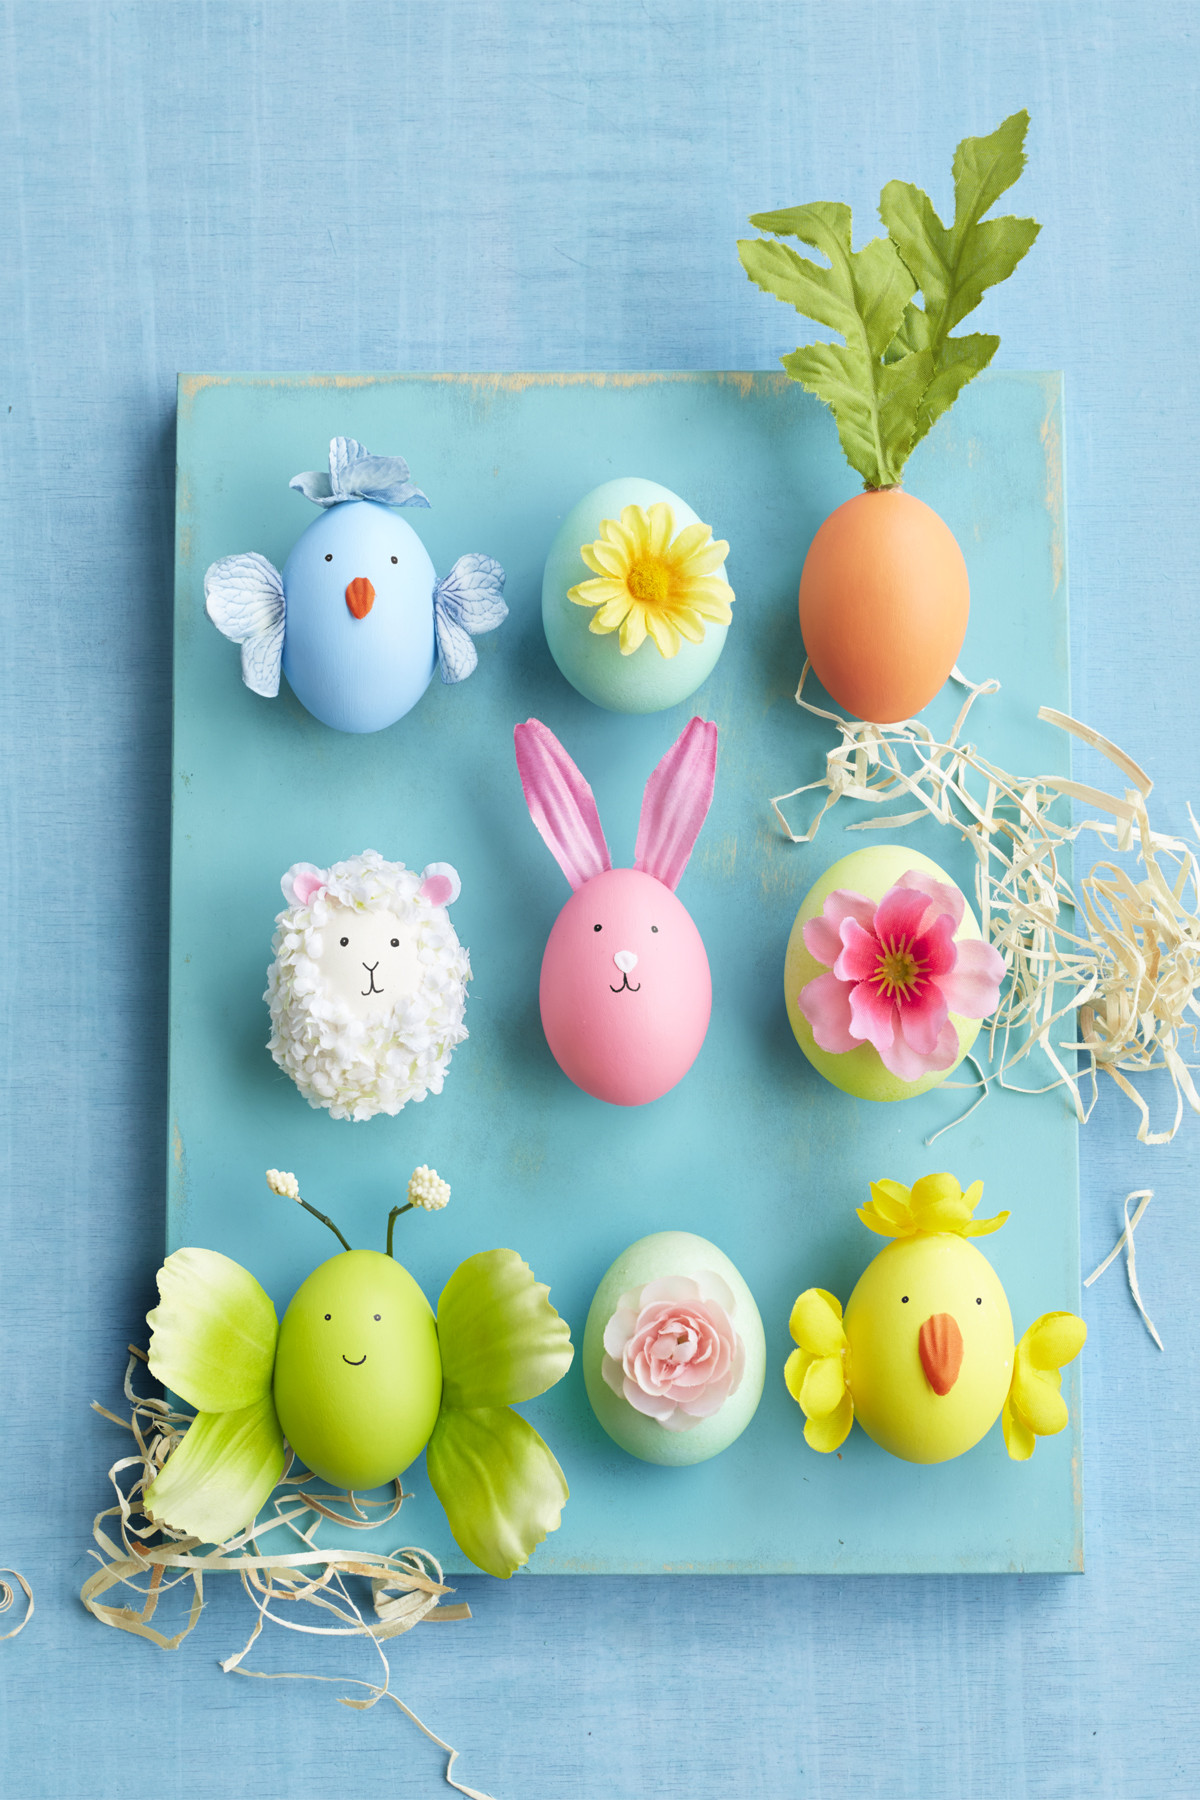 Ideas For Easter
 42 Cool Easter Egg Decorating Ideas Creative Designs for